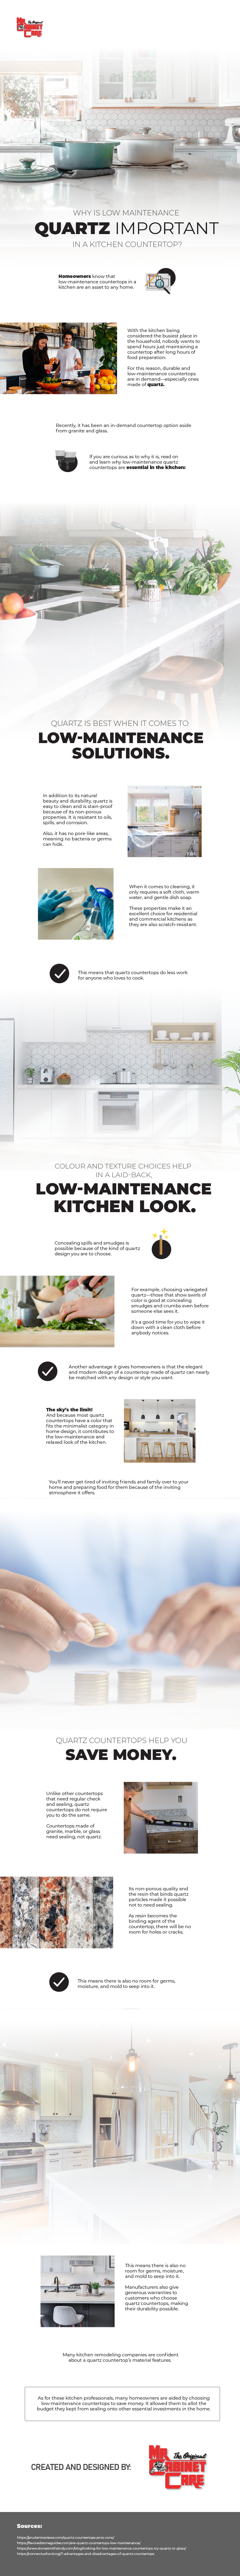 Why Low Maintenance Quartz is Important in a Kitchen Countertop 